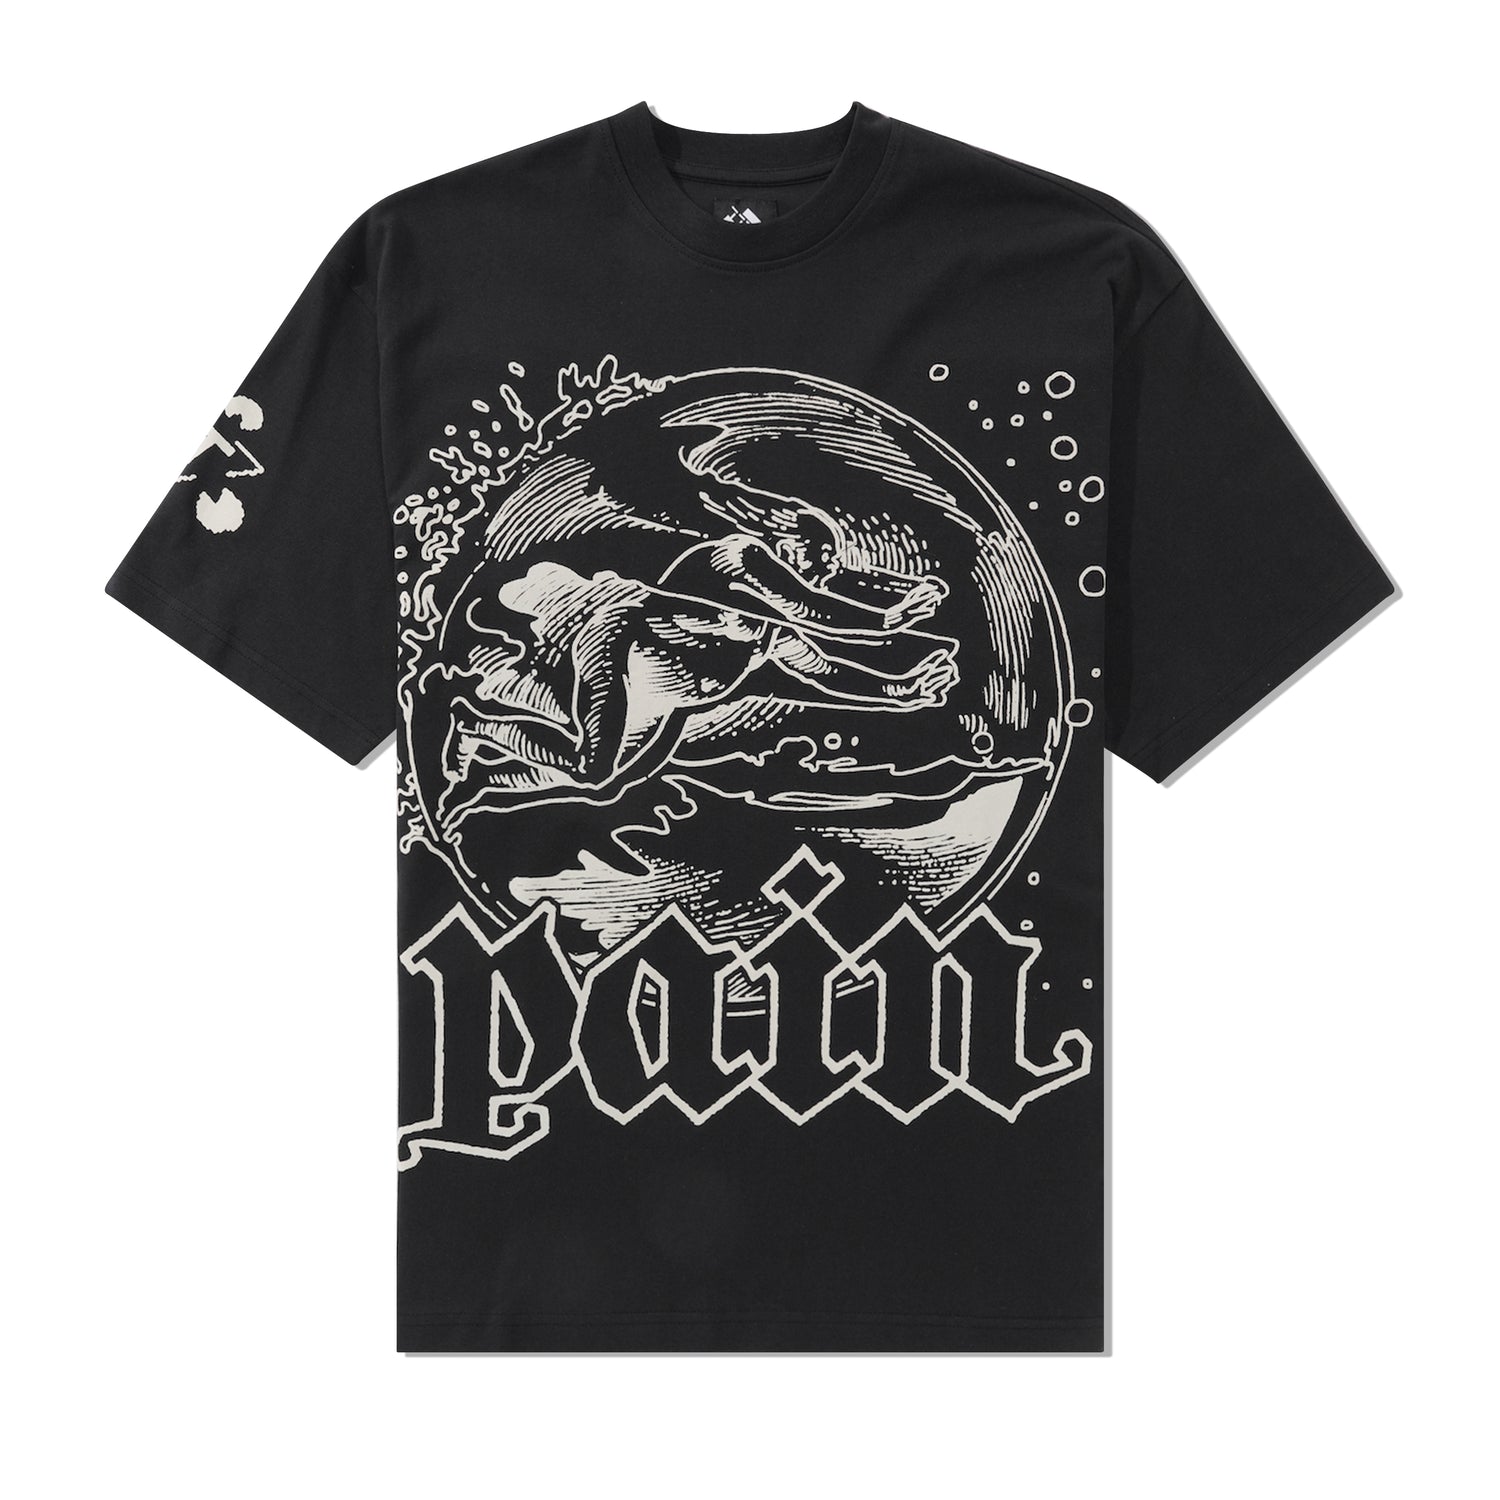 Man In Bubble With Pain Tee, Black